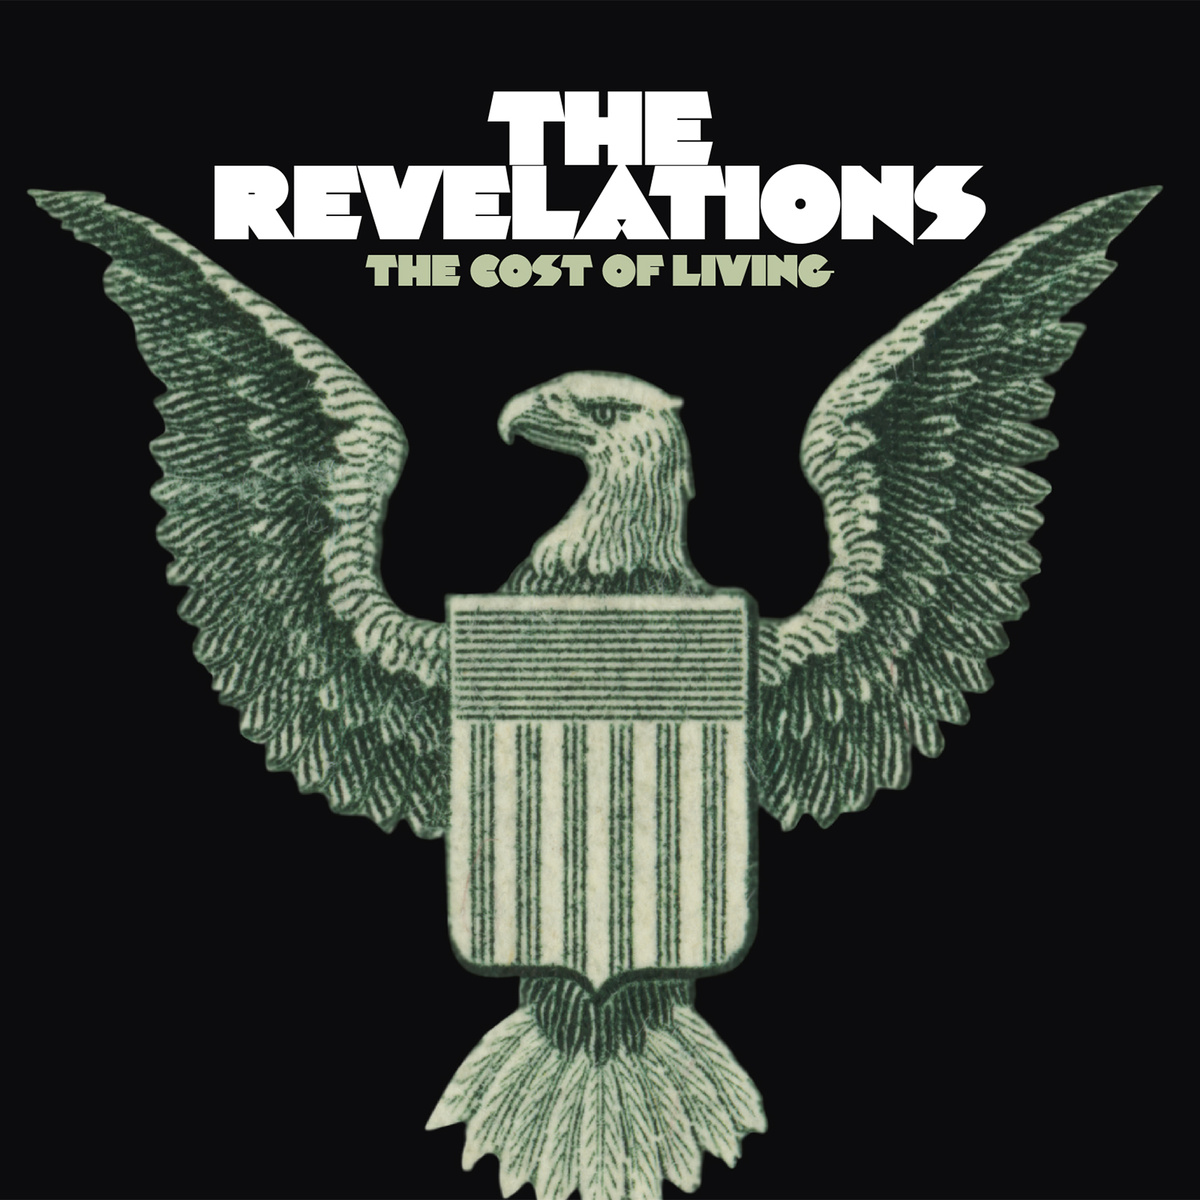 The Revelations featuring Rell "The Cost of Living" (Free Album)